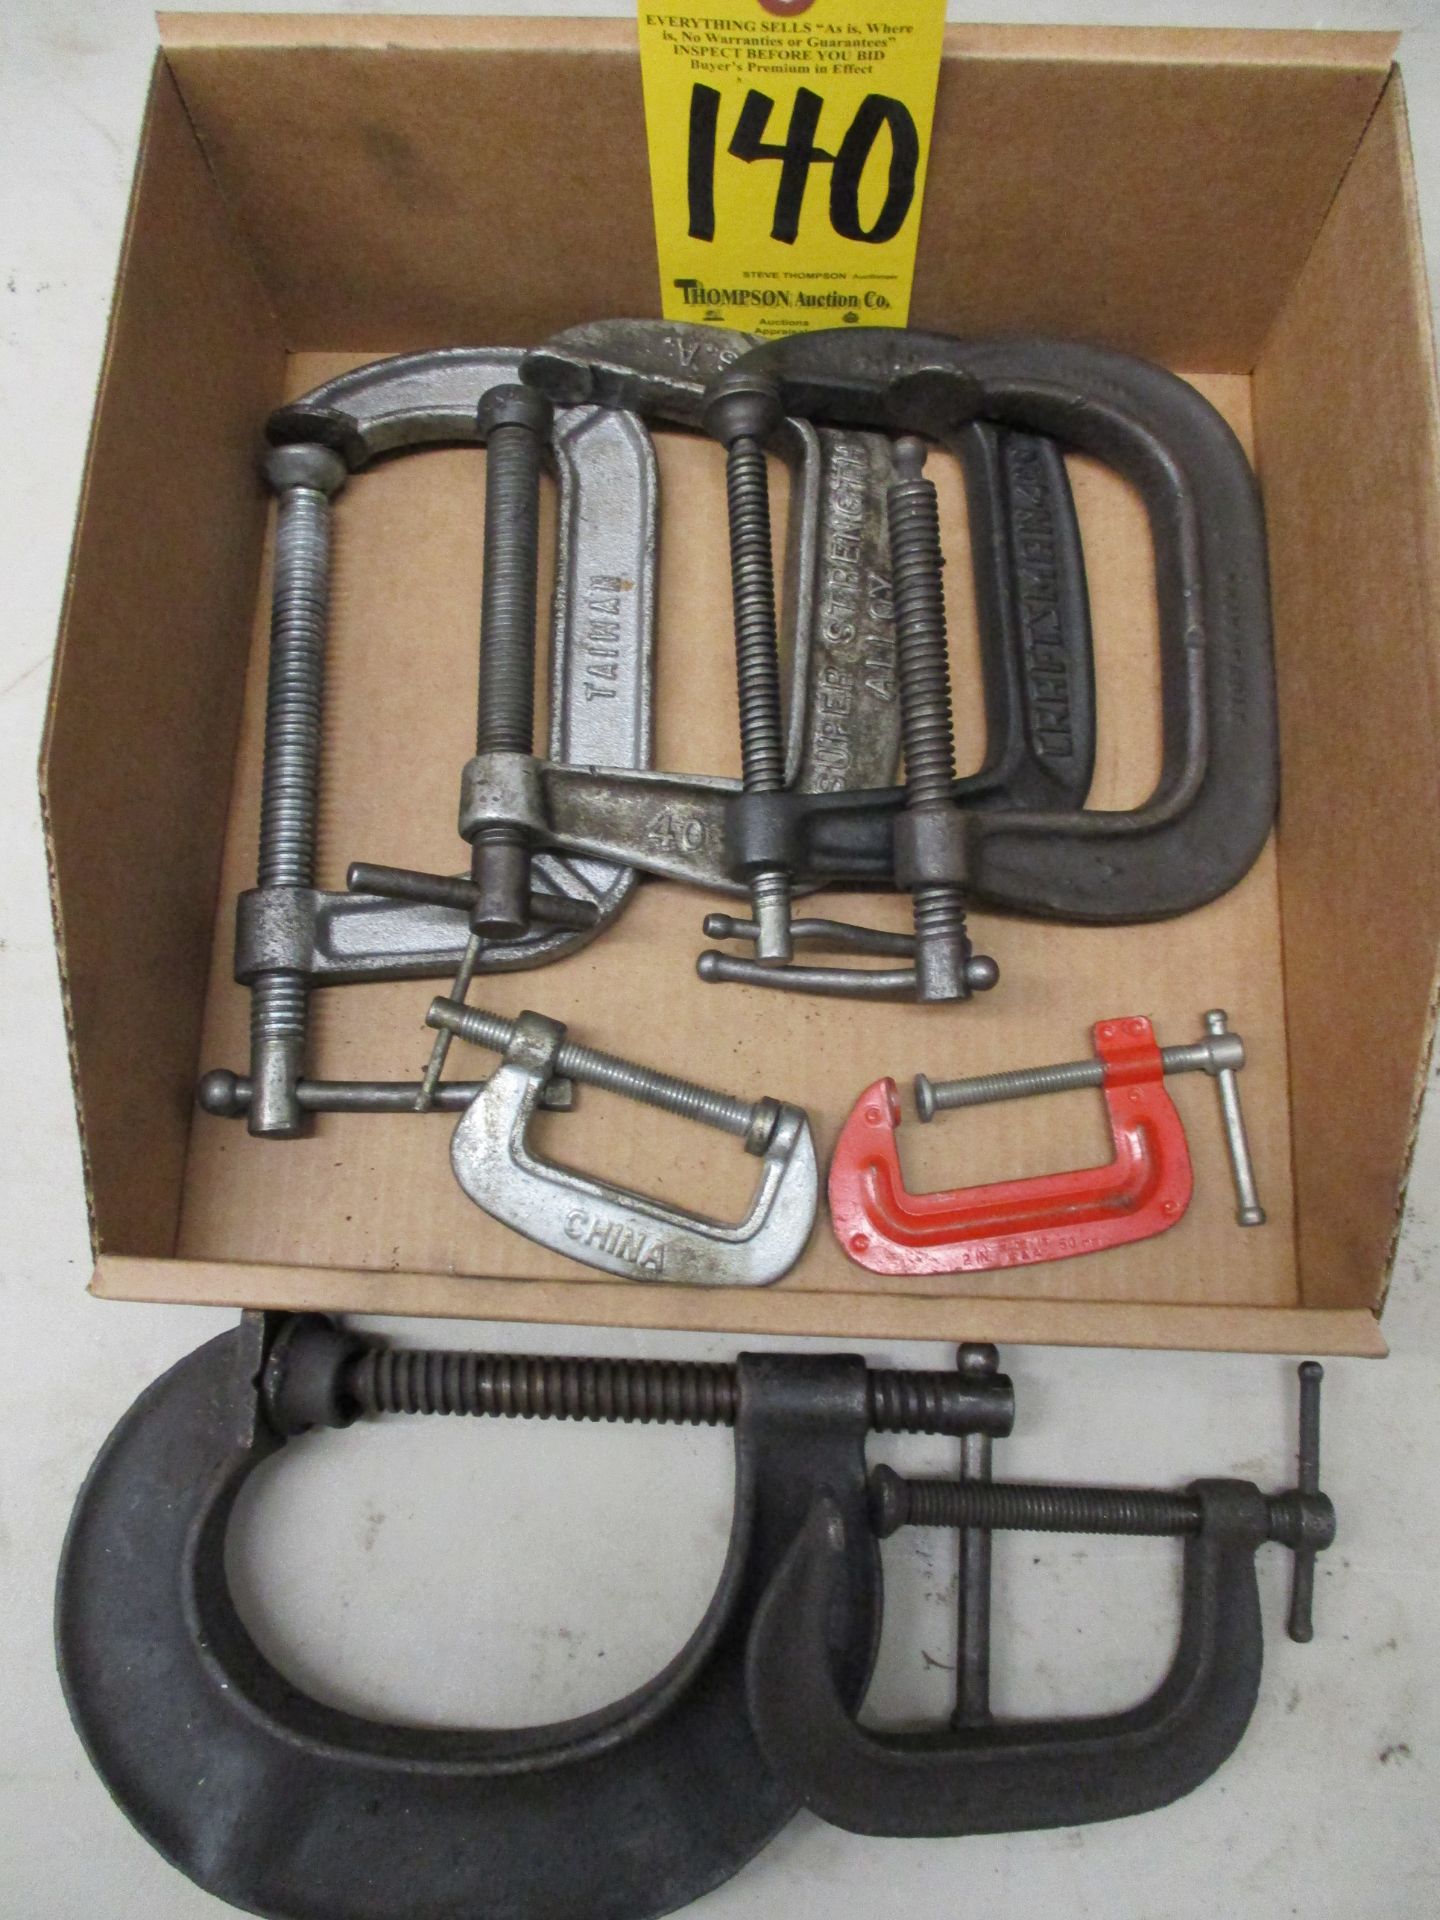 C-Clamps